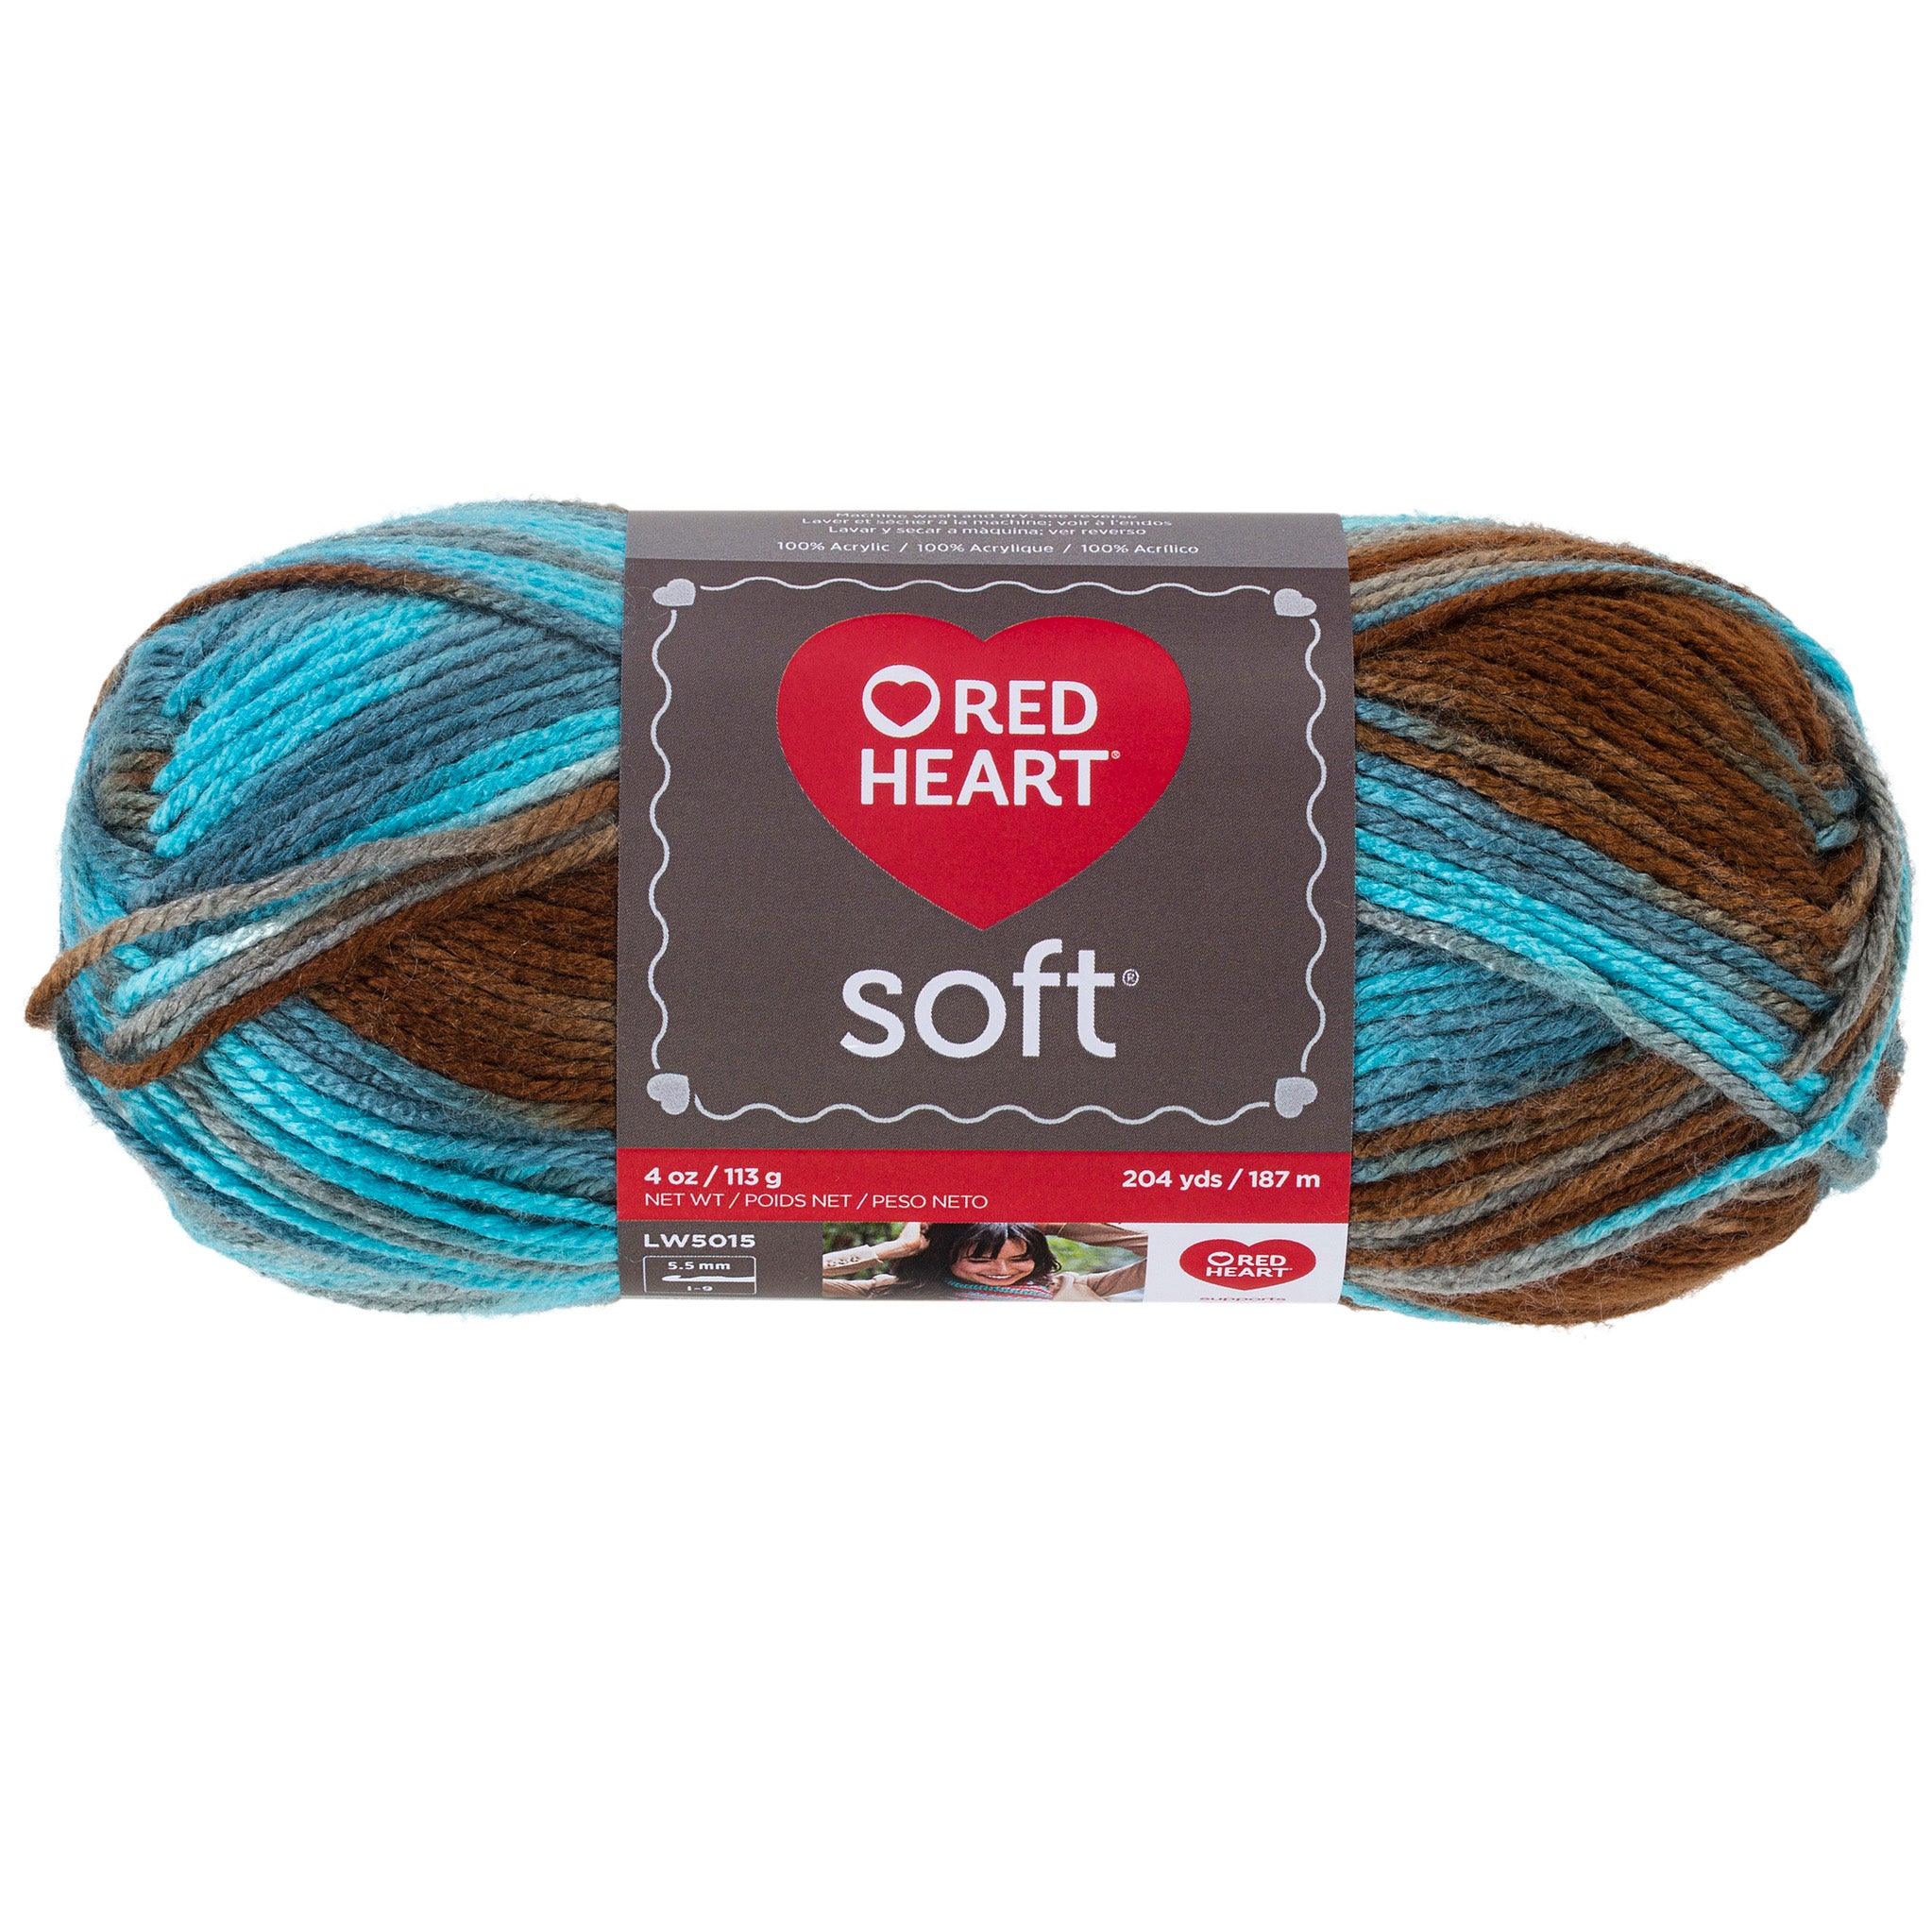 I wanted to see what those multicolored yarn skeins tufted like